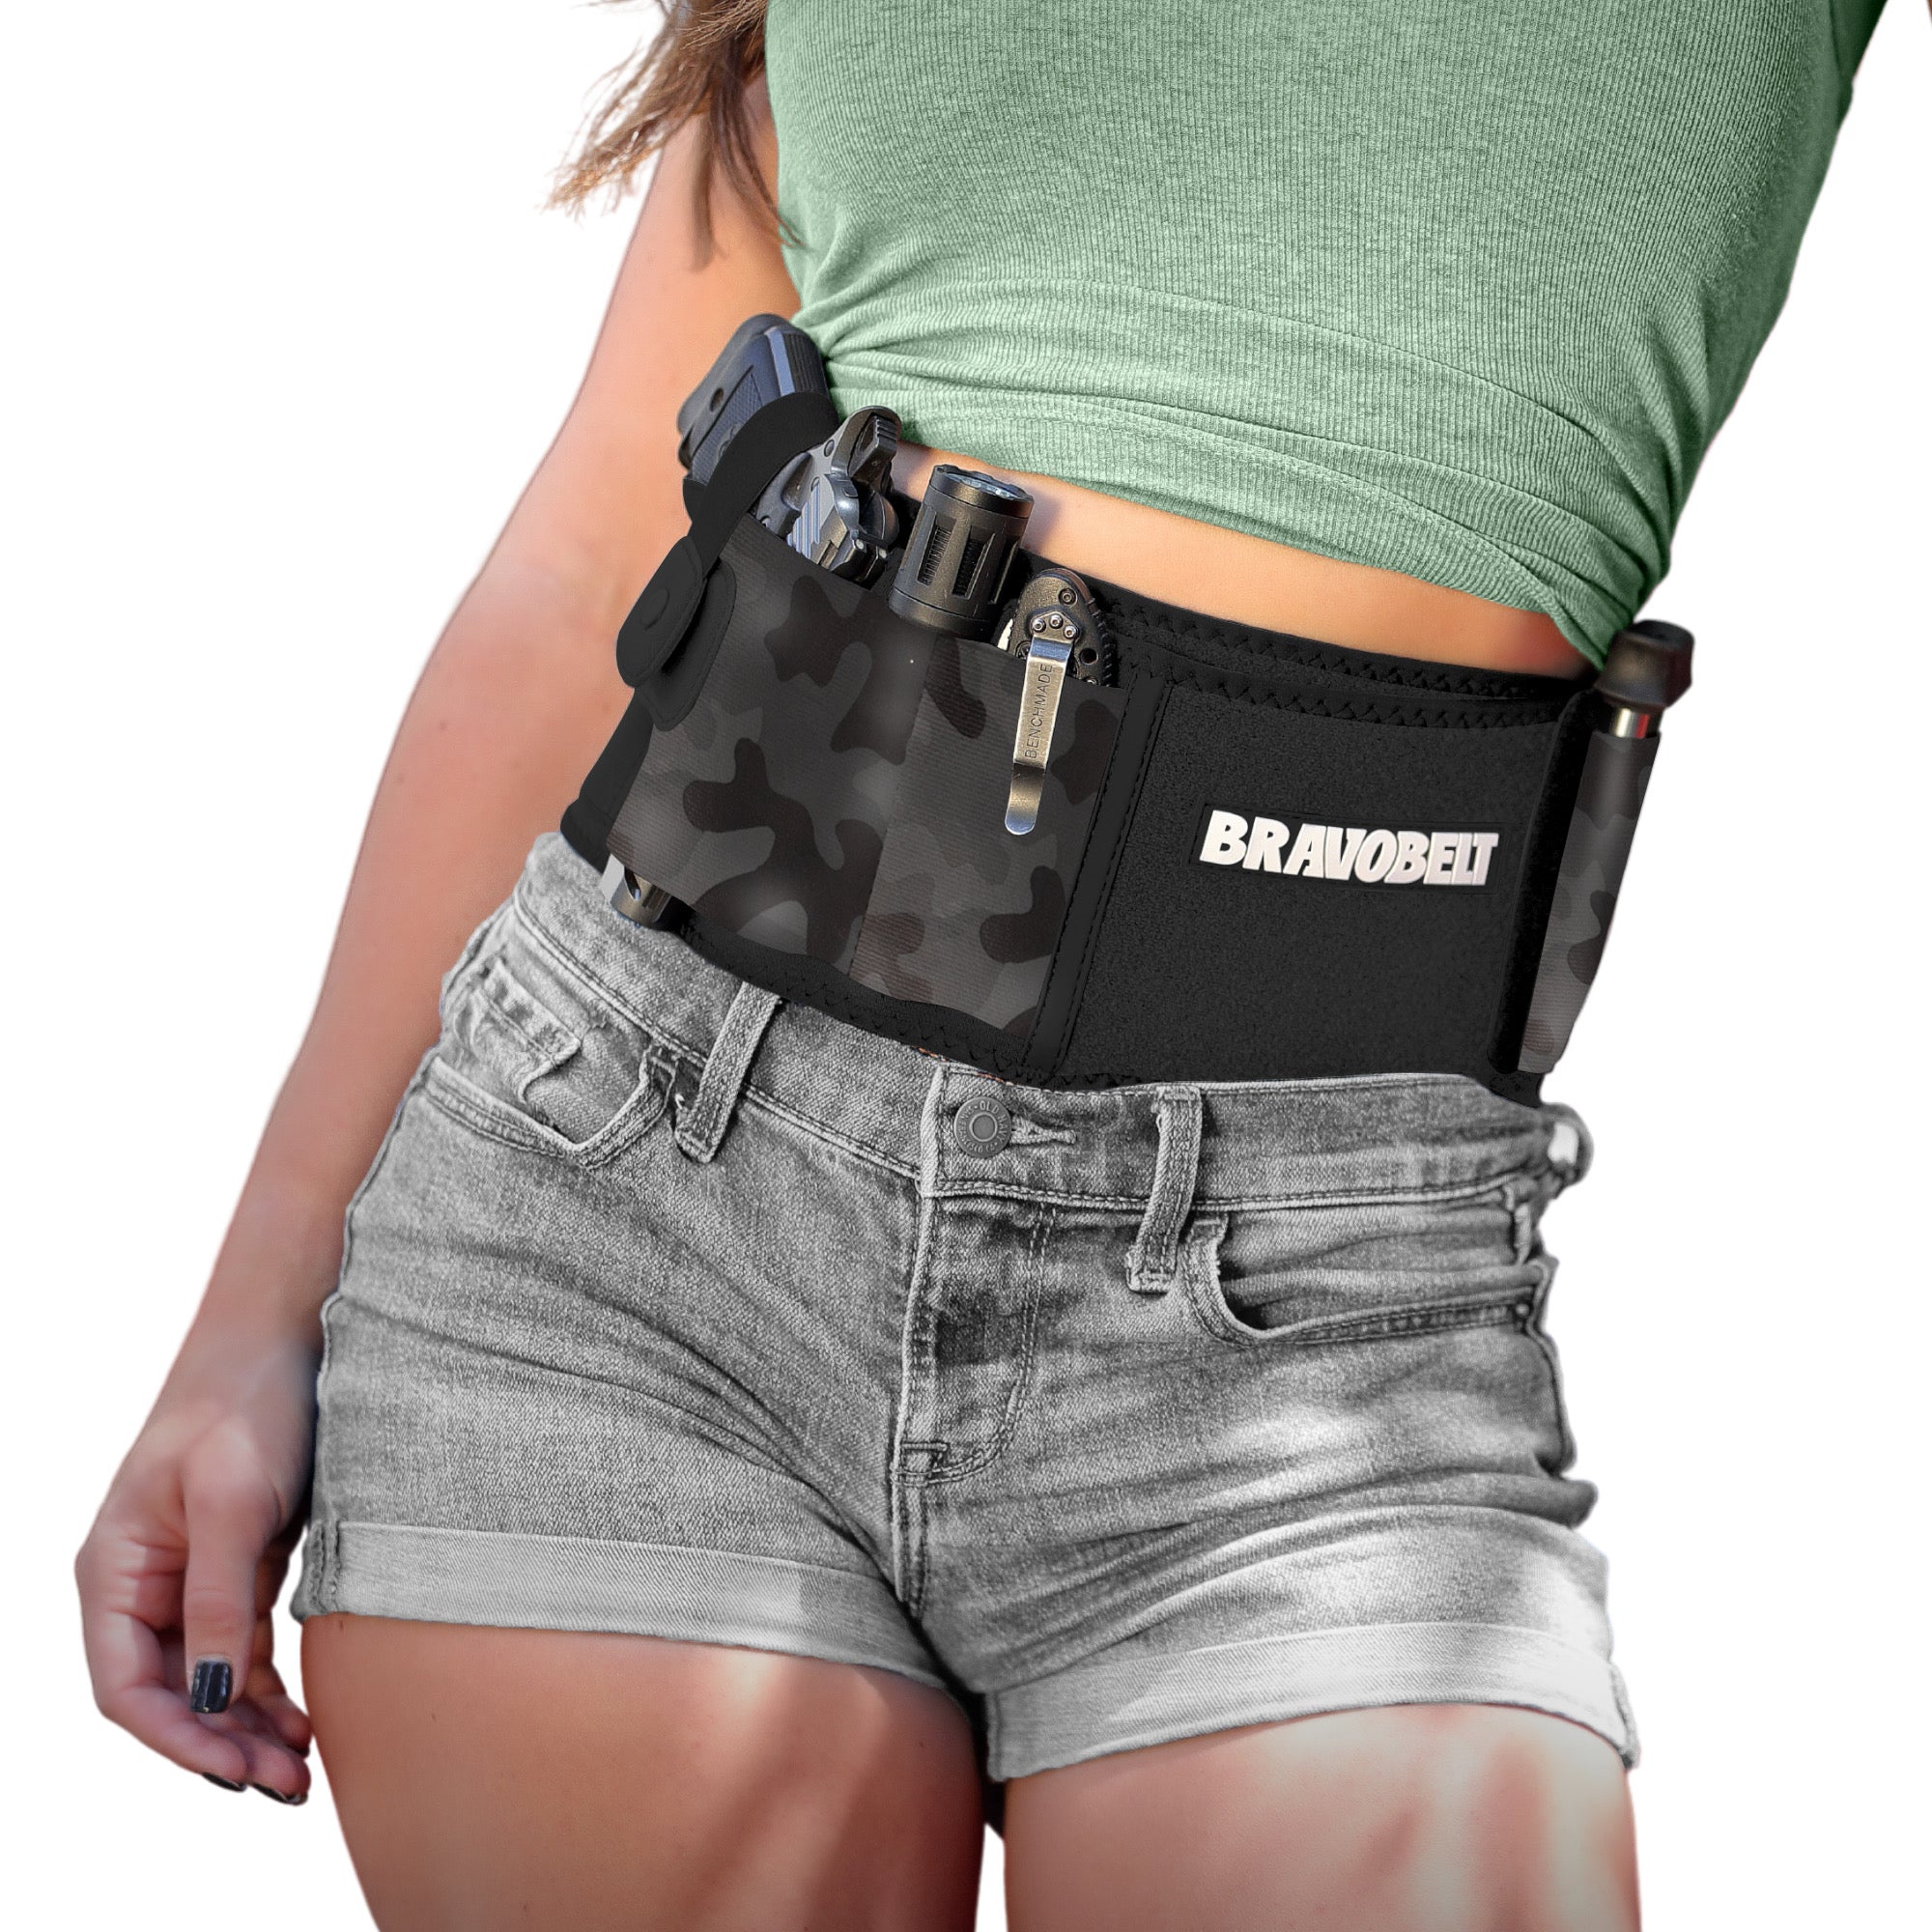 Yosoo Belly Band Gun Holster with Dual Magazine Pouches Magnetic Buckle  Concealed Carry forHandguns, Revolvers, Adjustable Waist Size up to 44'',  Left, Right Handed Draw, Black, Gun Holsters -  Canada